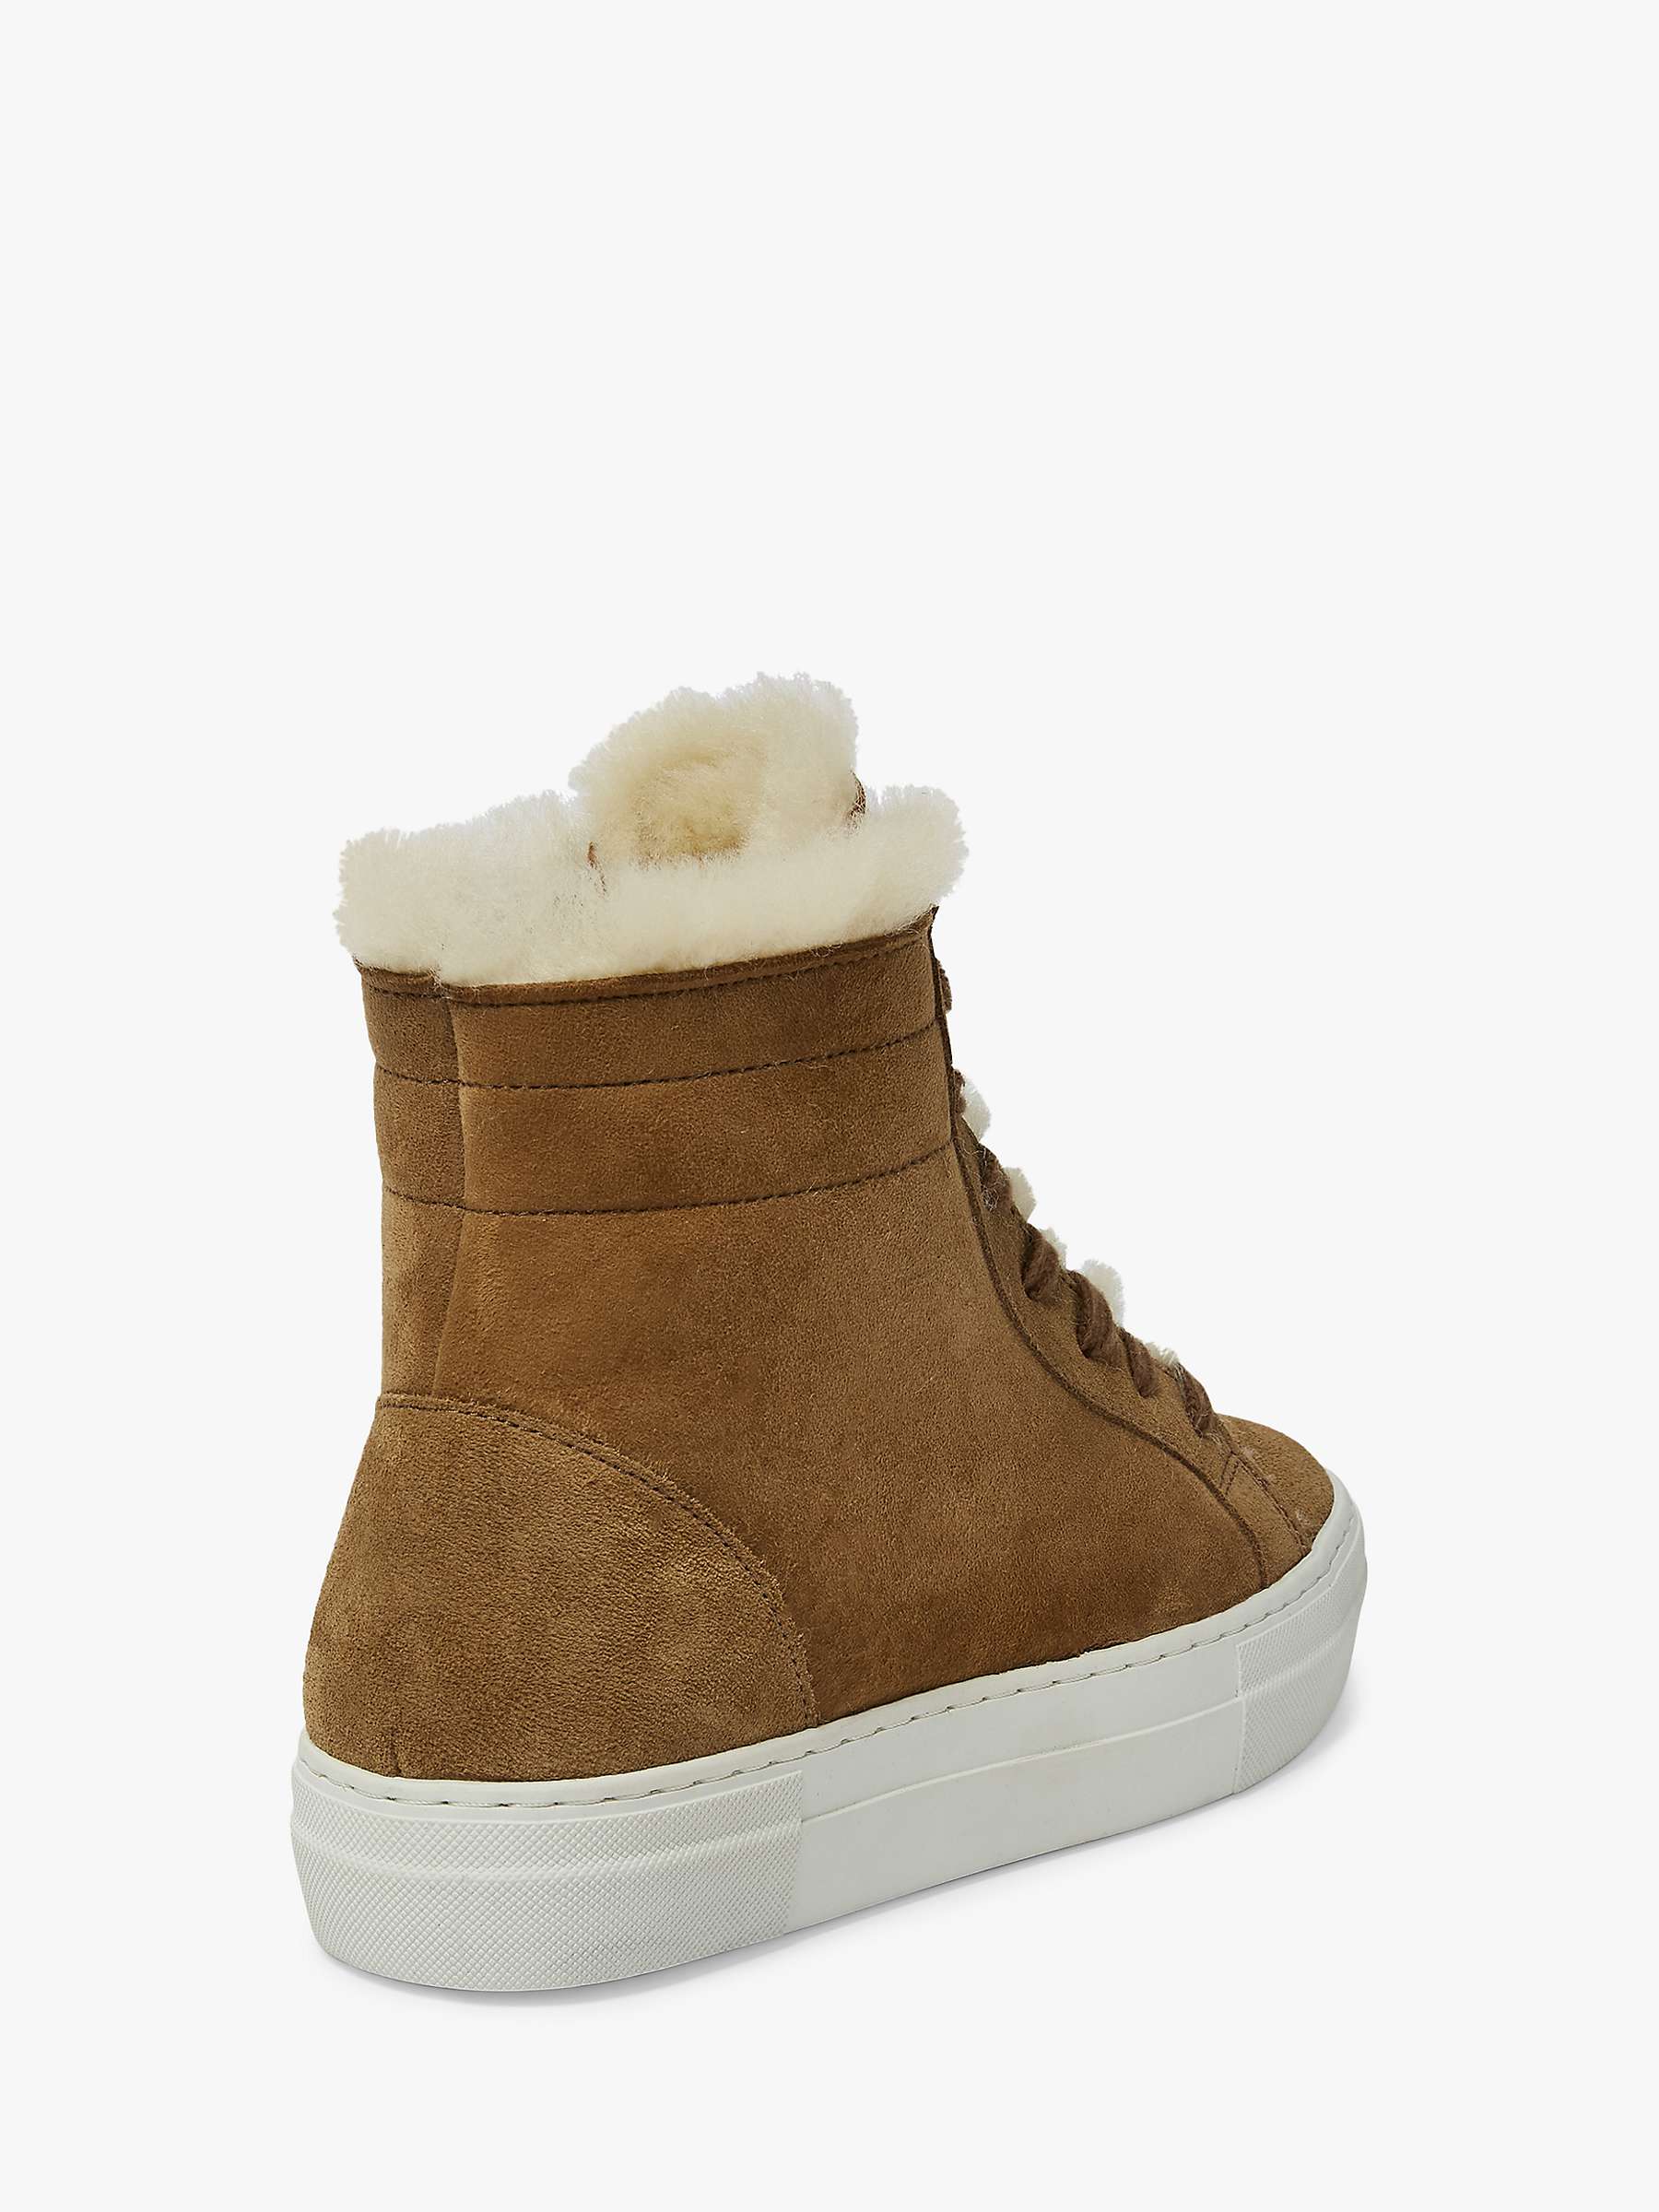 Buy Celtic & Co. Sheepskin High Top Trainers, Whisky Online at johnlewis.com